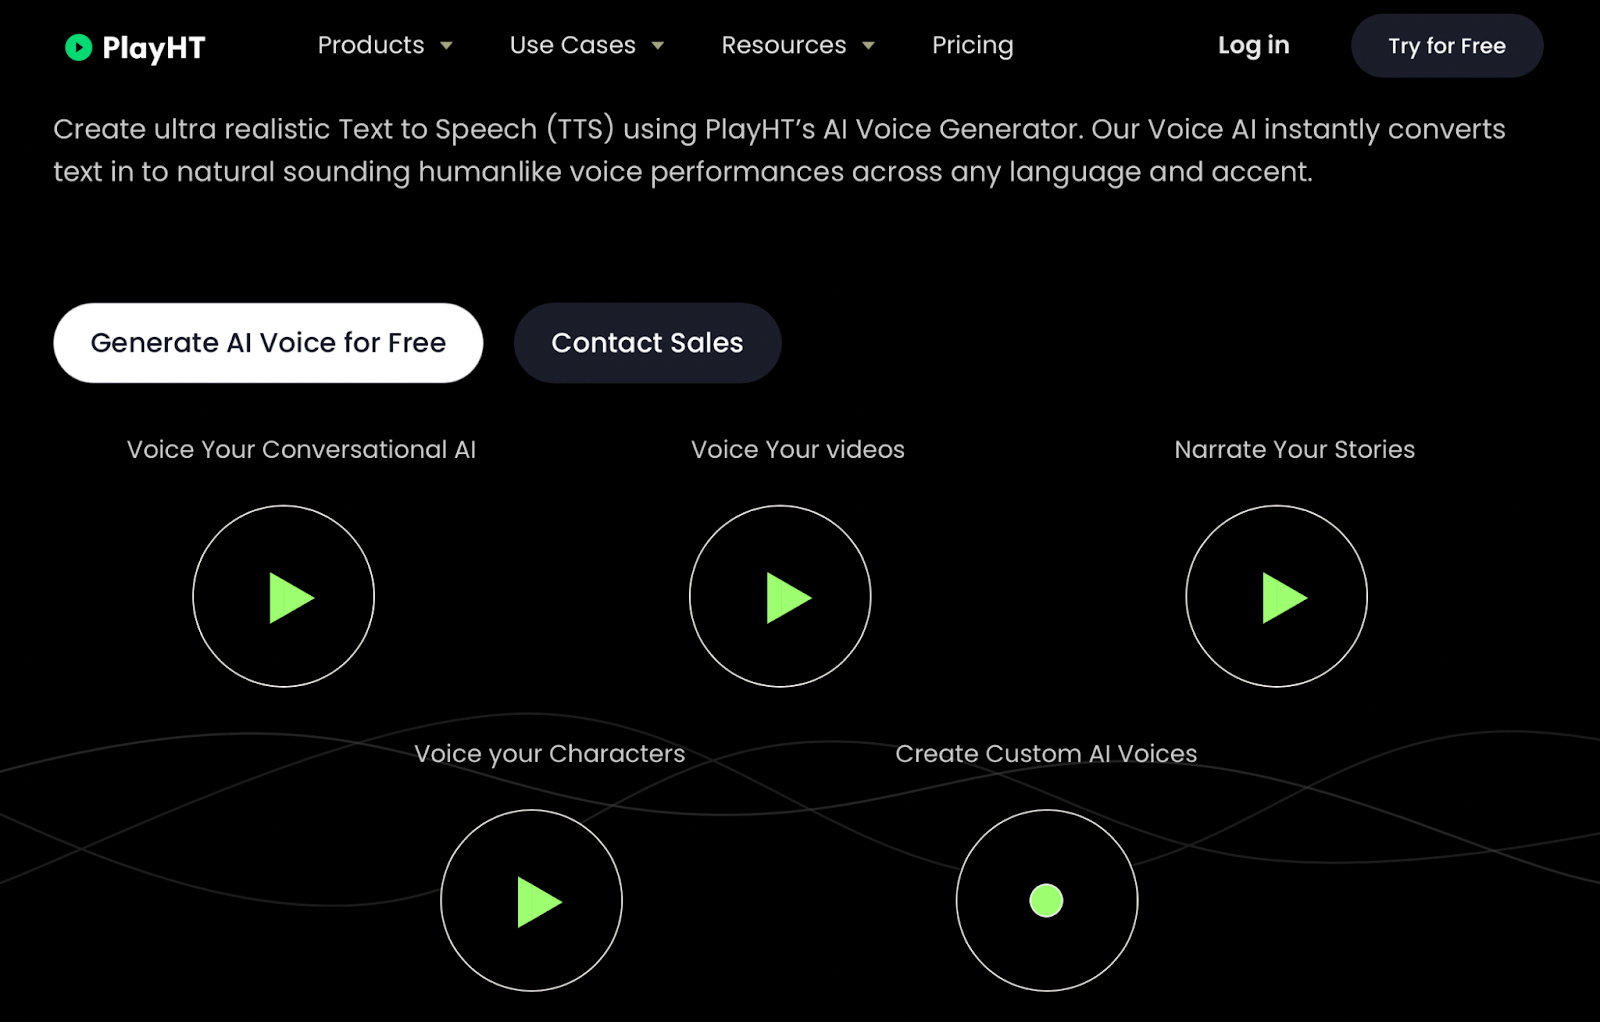 Play.ht is an AI Dubbing platform for text-to-speech synthesis and voice generator